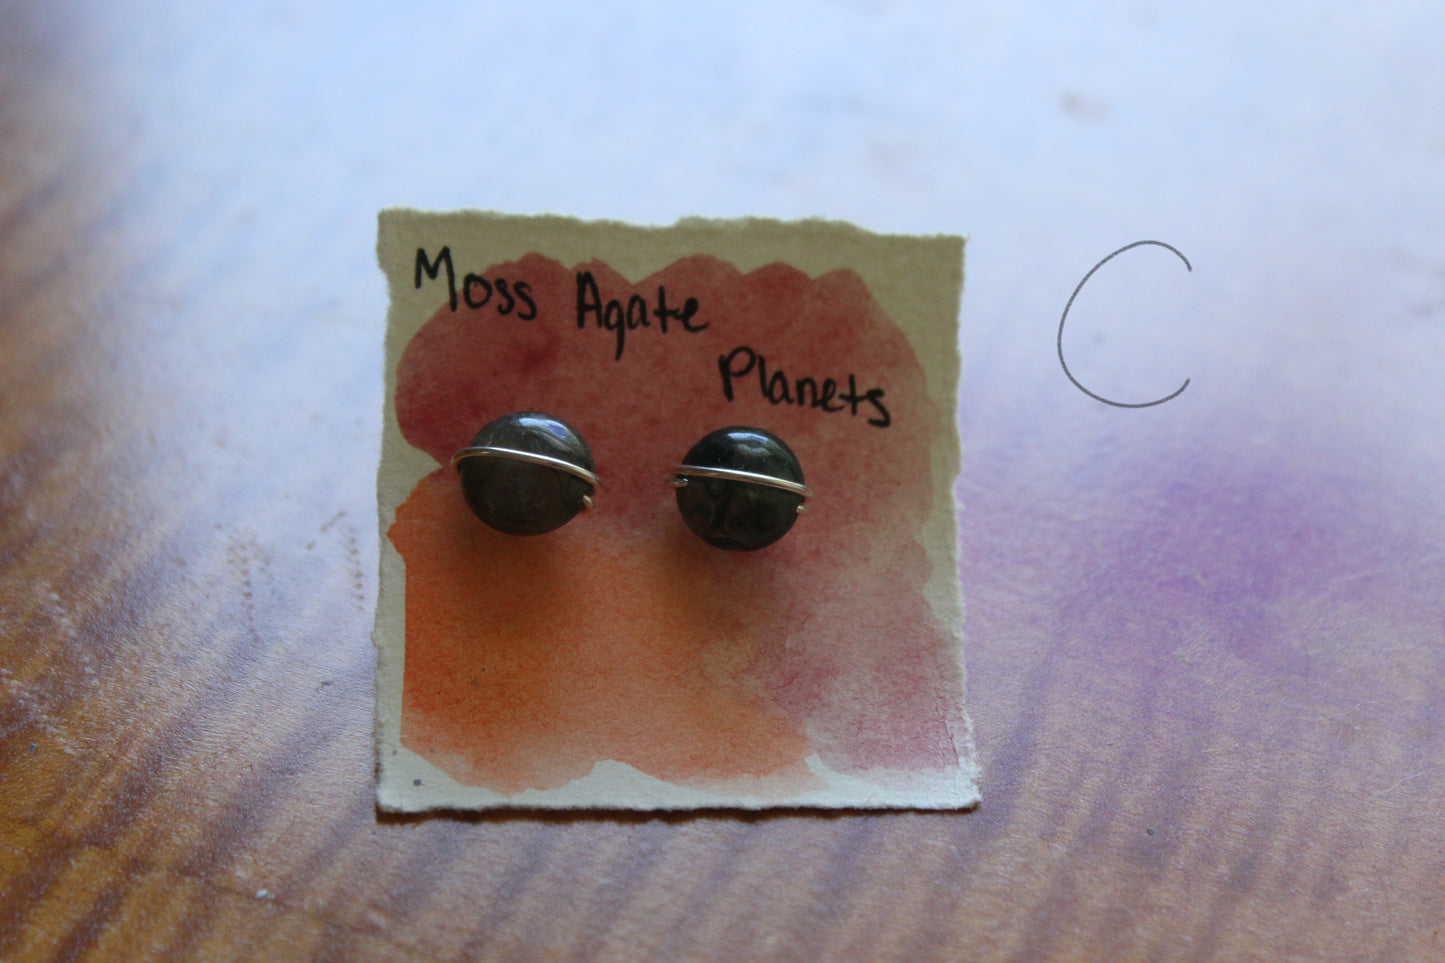 Moss Agate Planet Studs